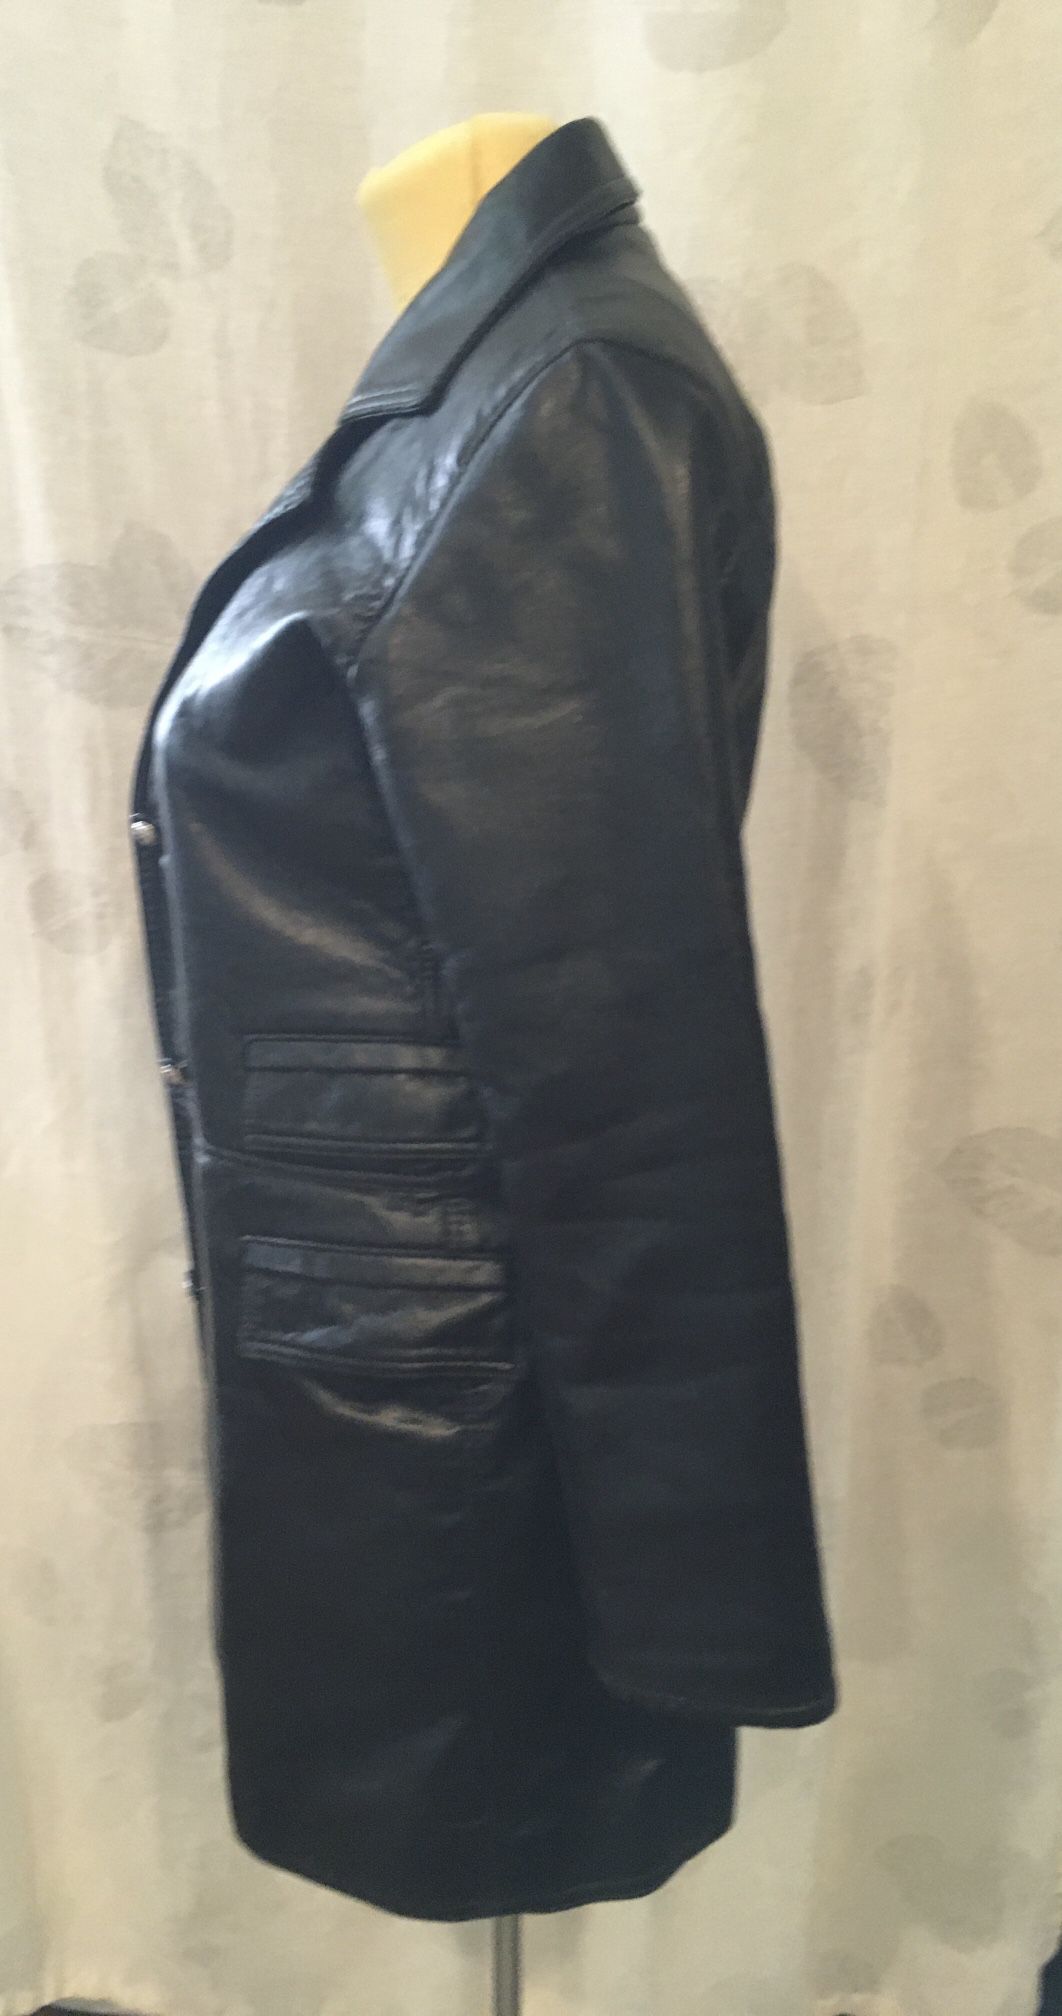 Old LOUIS VUITTON-《for ladies 》 Leather jacket Made in Italy #louisvuitton